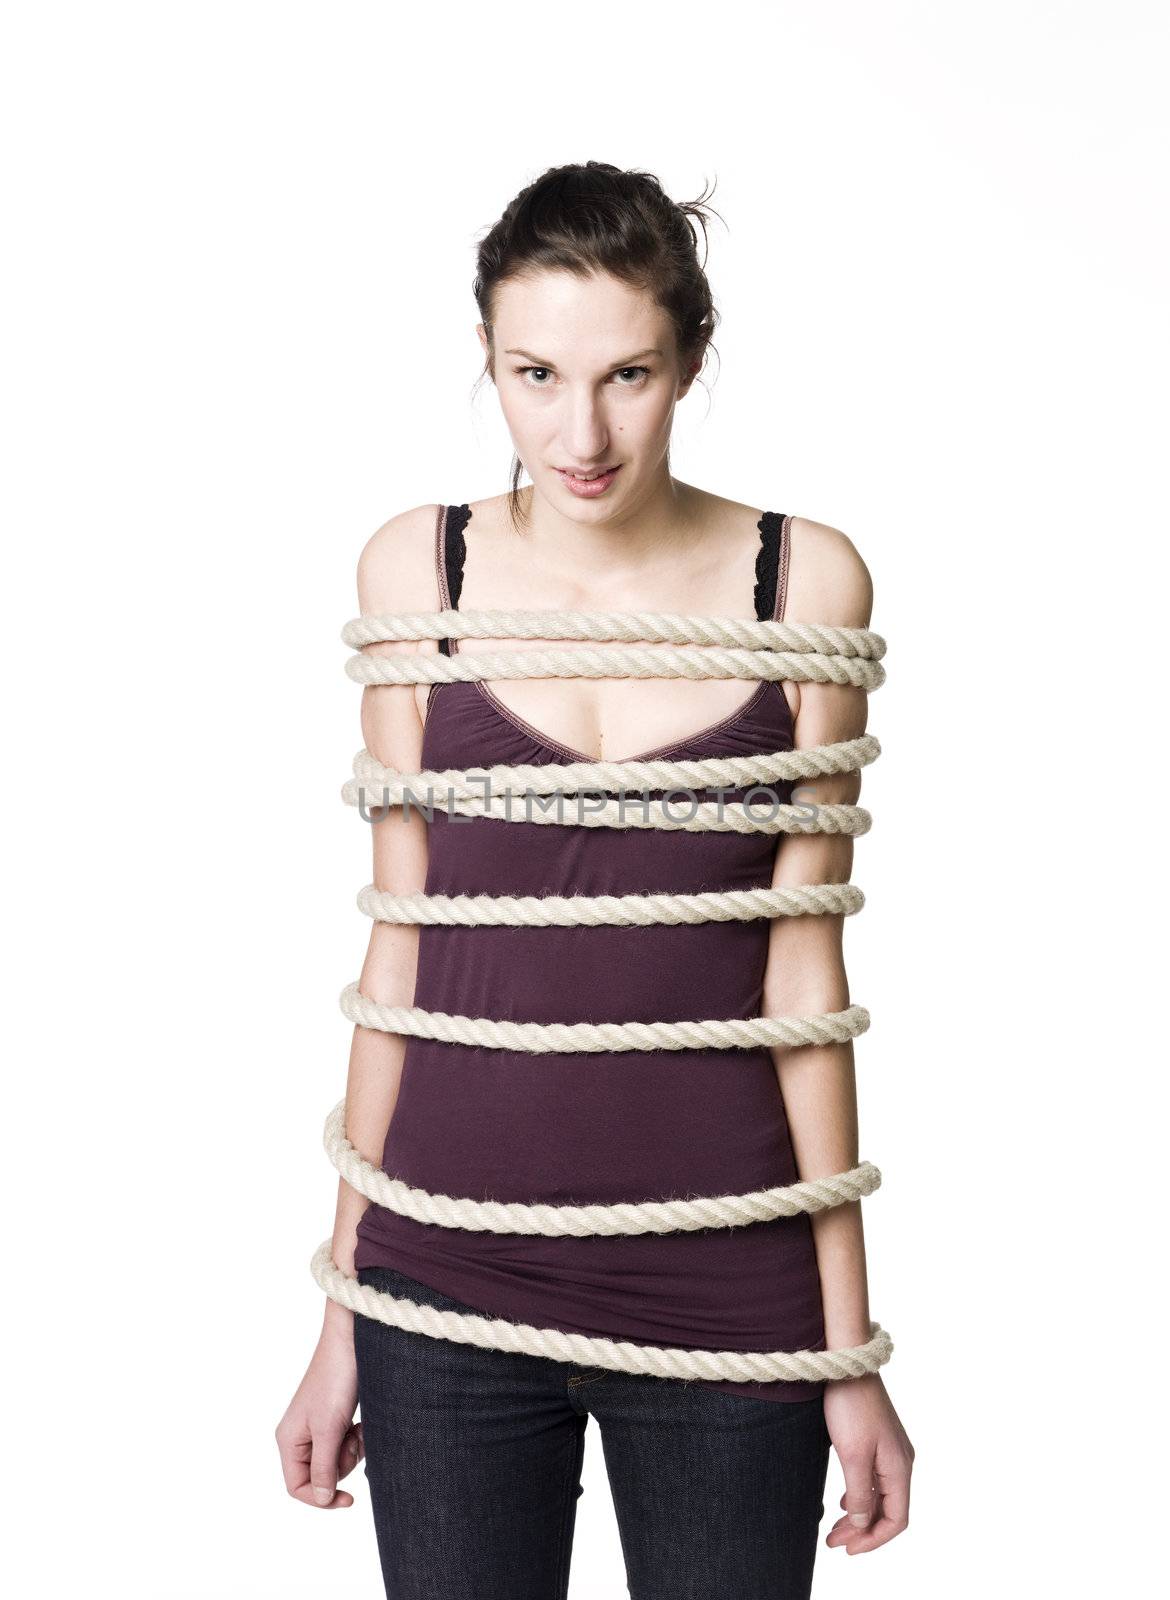 Tied up woman by gemenacom